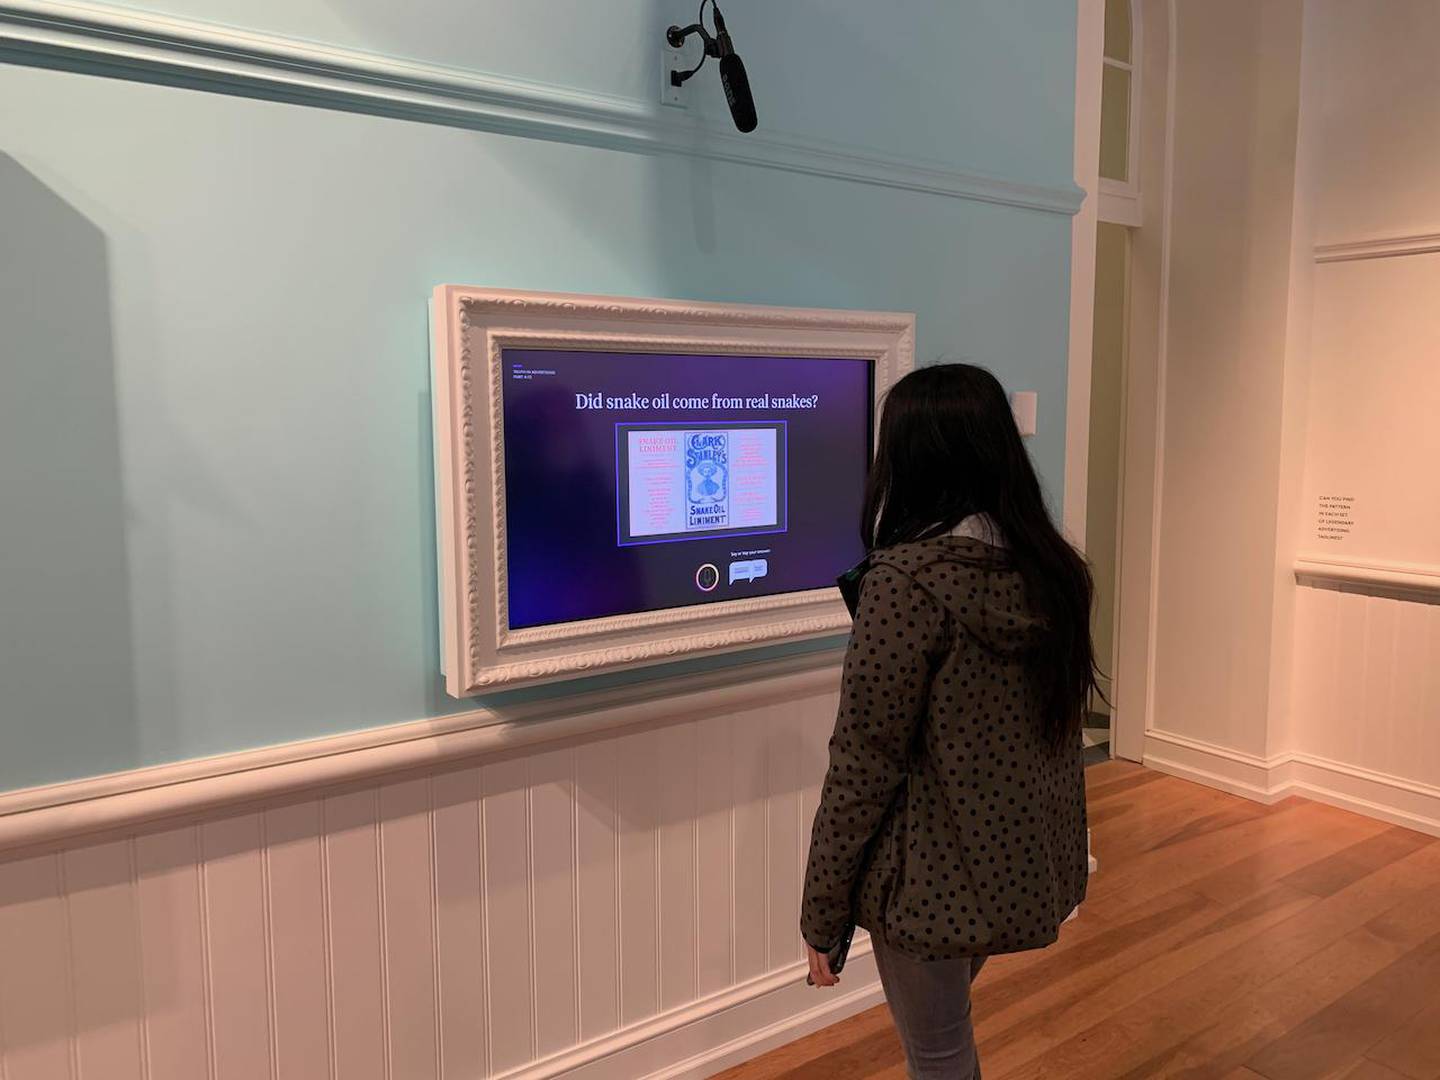 Visitors of all ages can learn more about words with the help of various interactive exhibits and exercises placed throughout the museum.